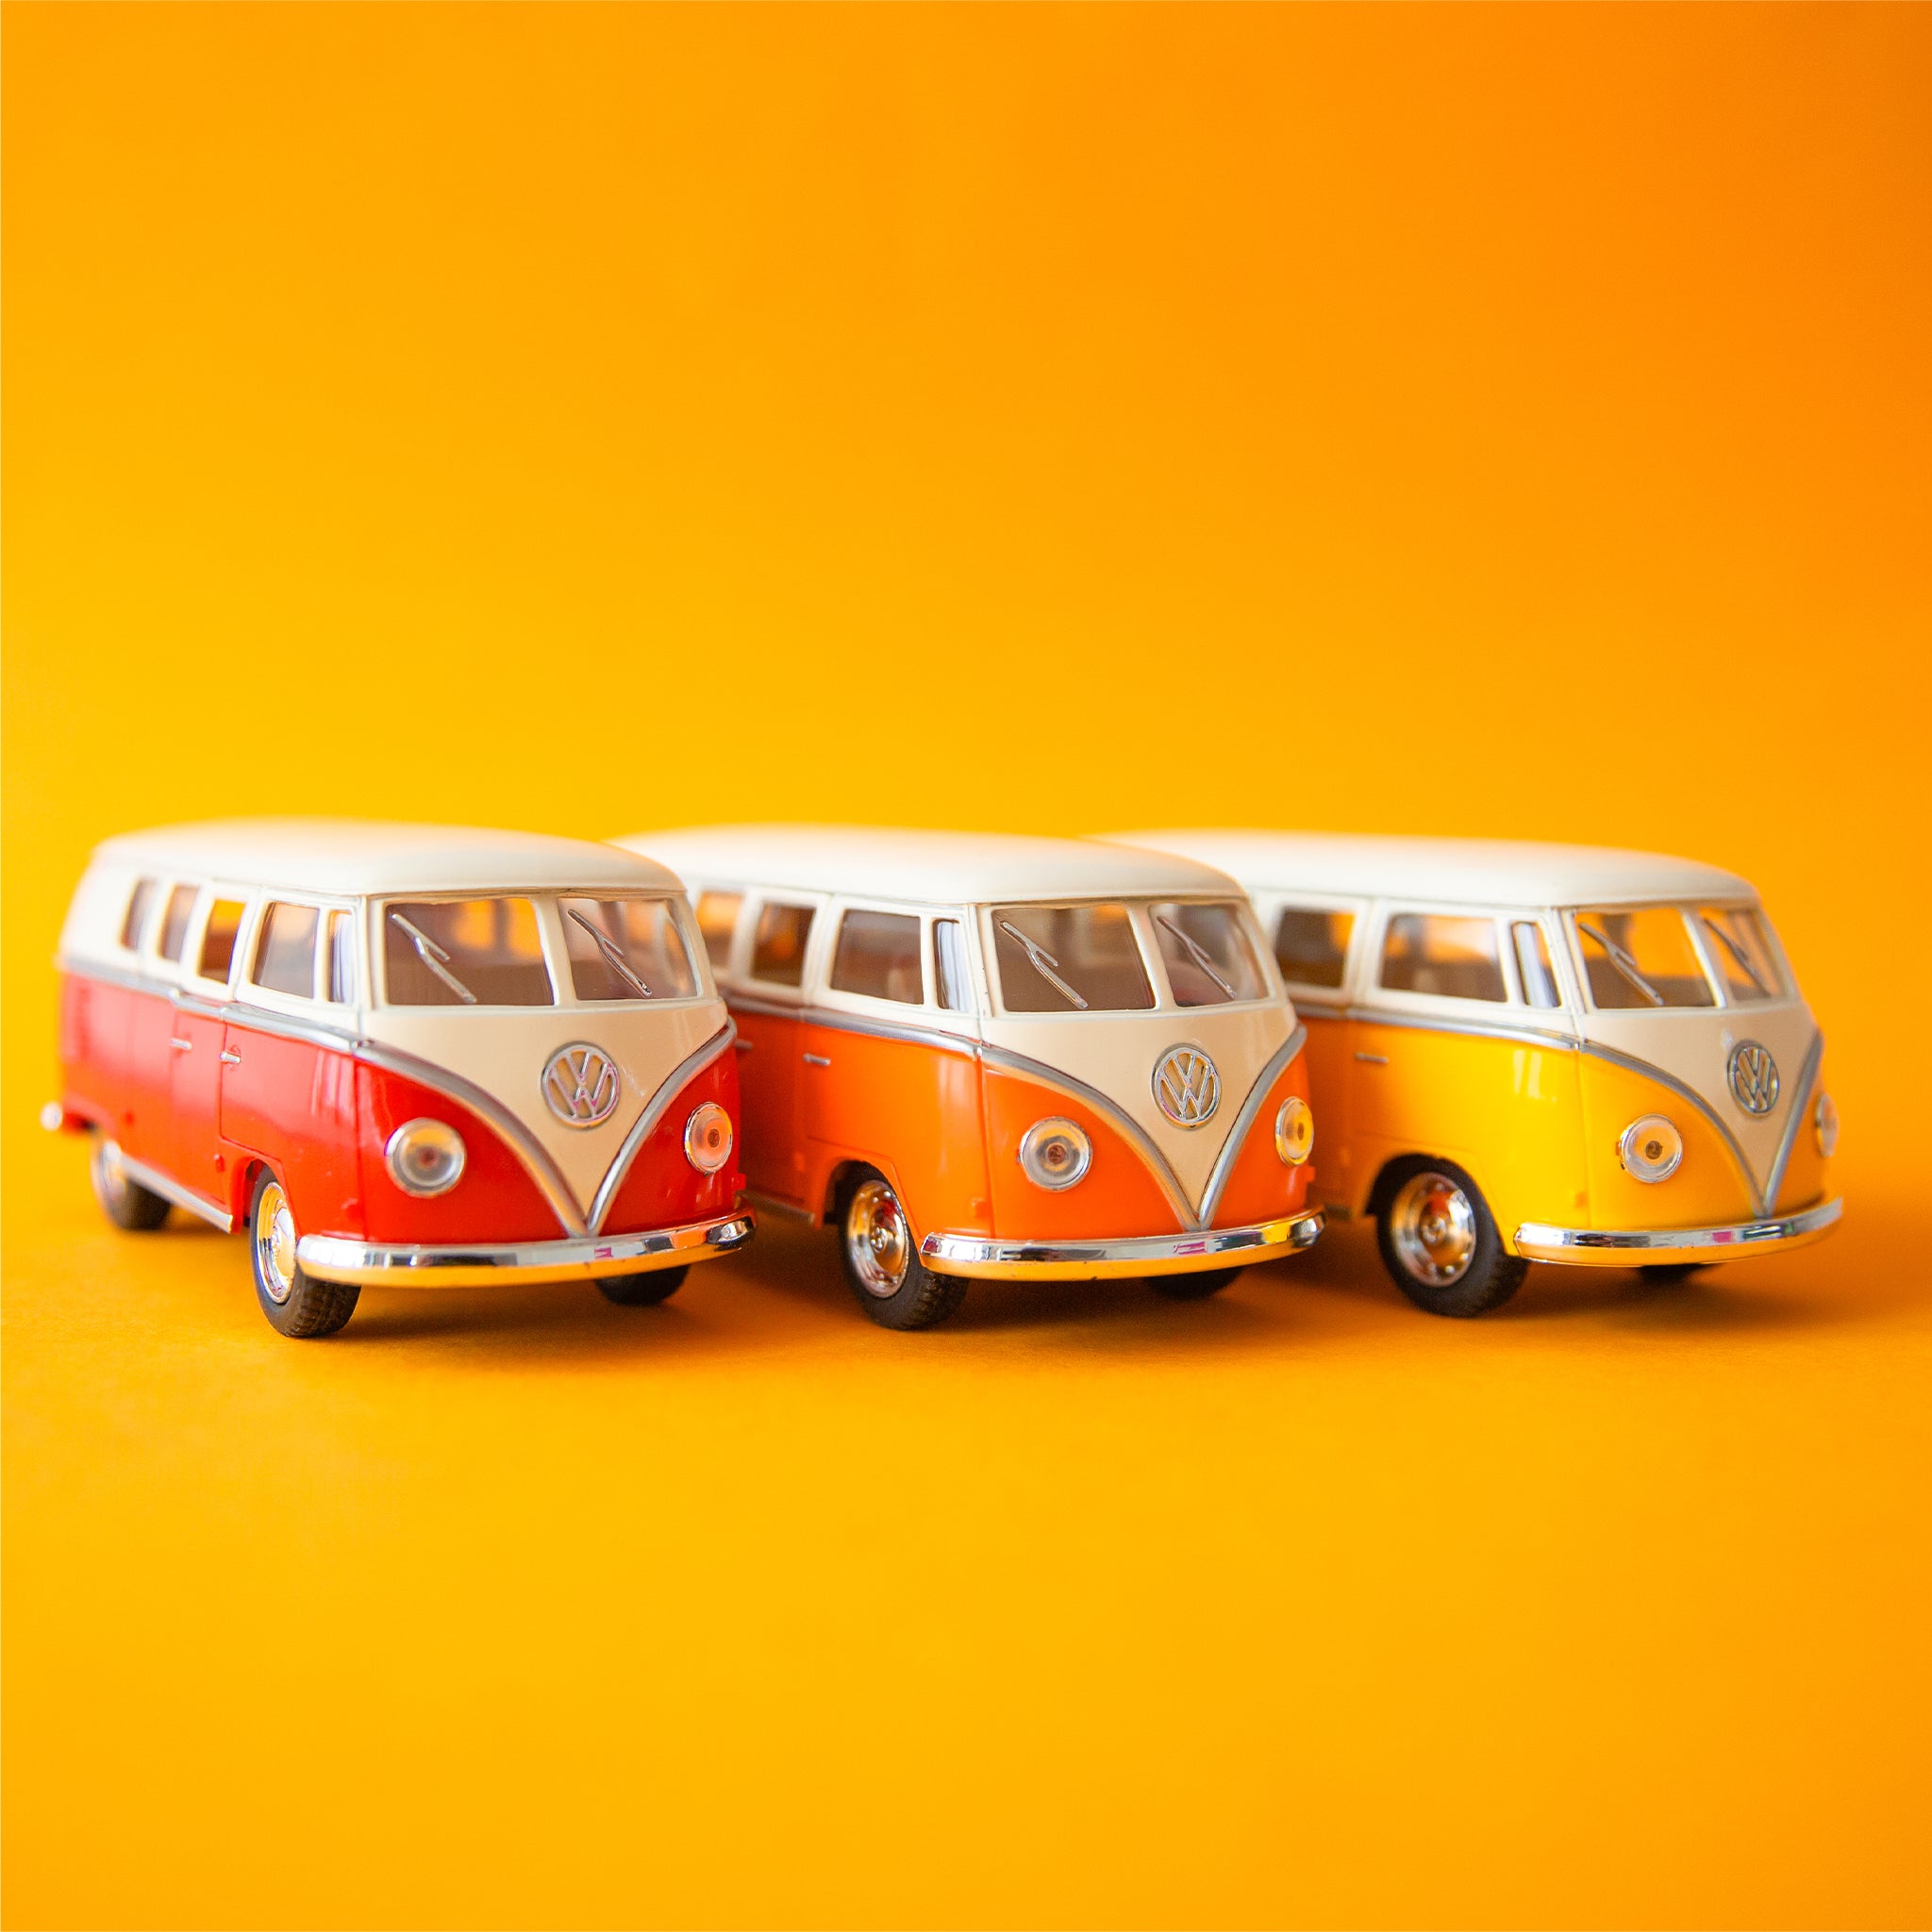 On a yellow background is three volkswagen bus toys in a red shade, an orange and a yellow. Each color sold separately.